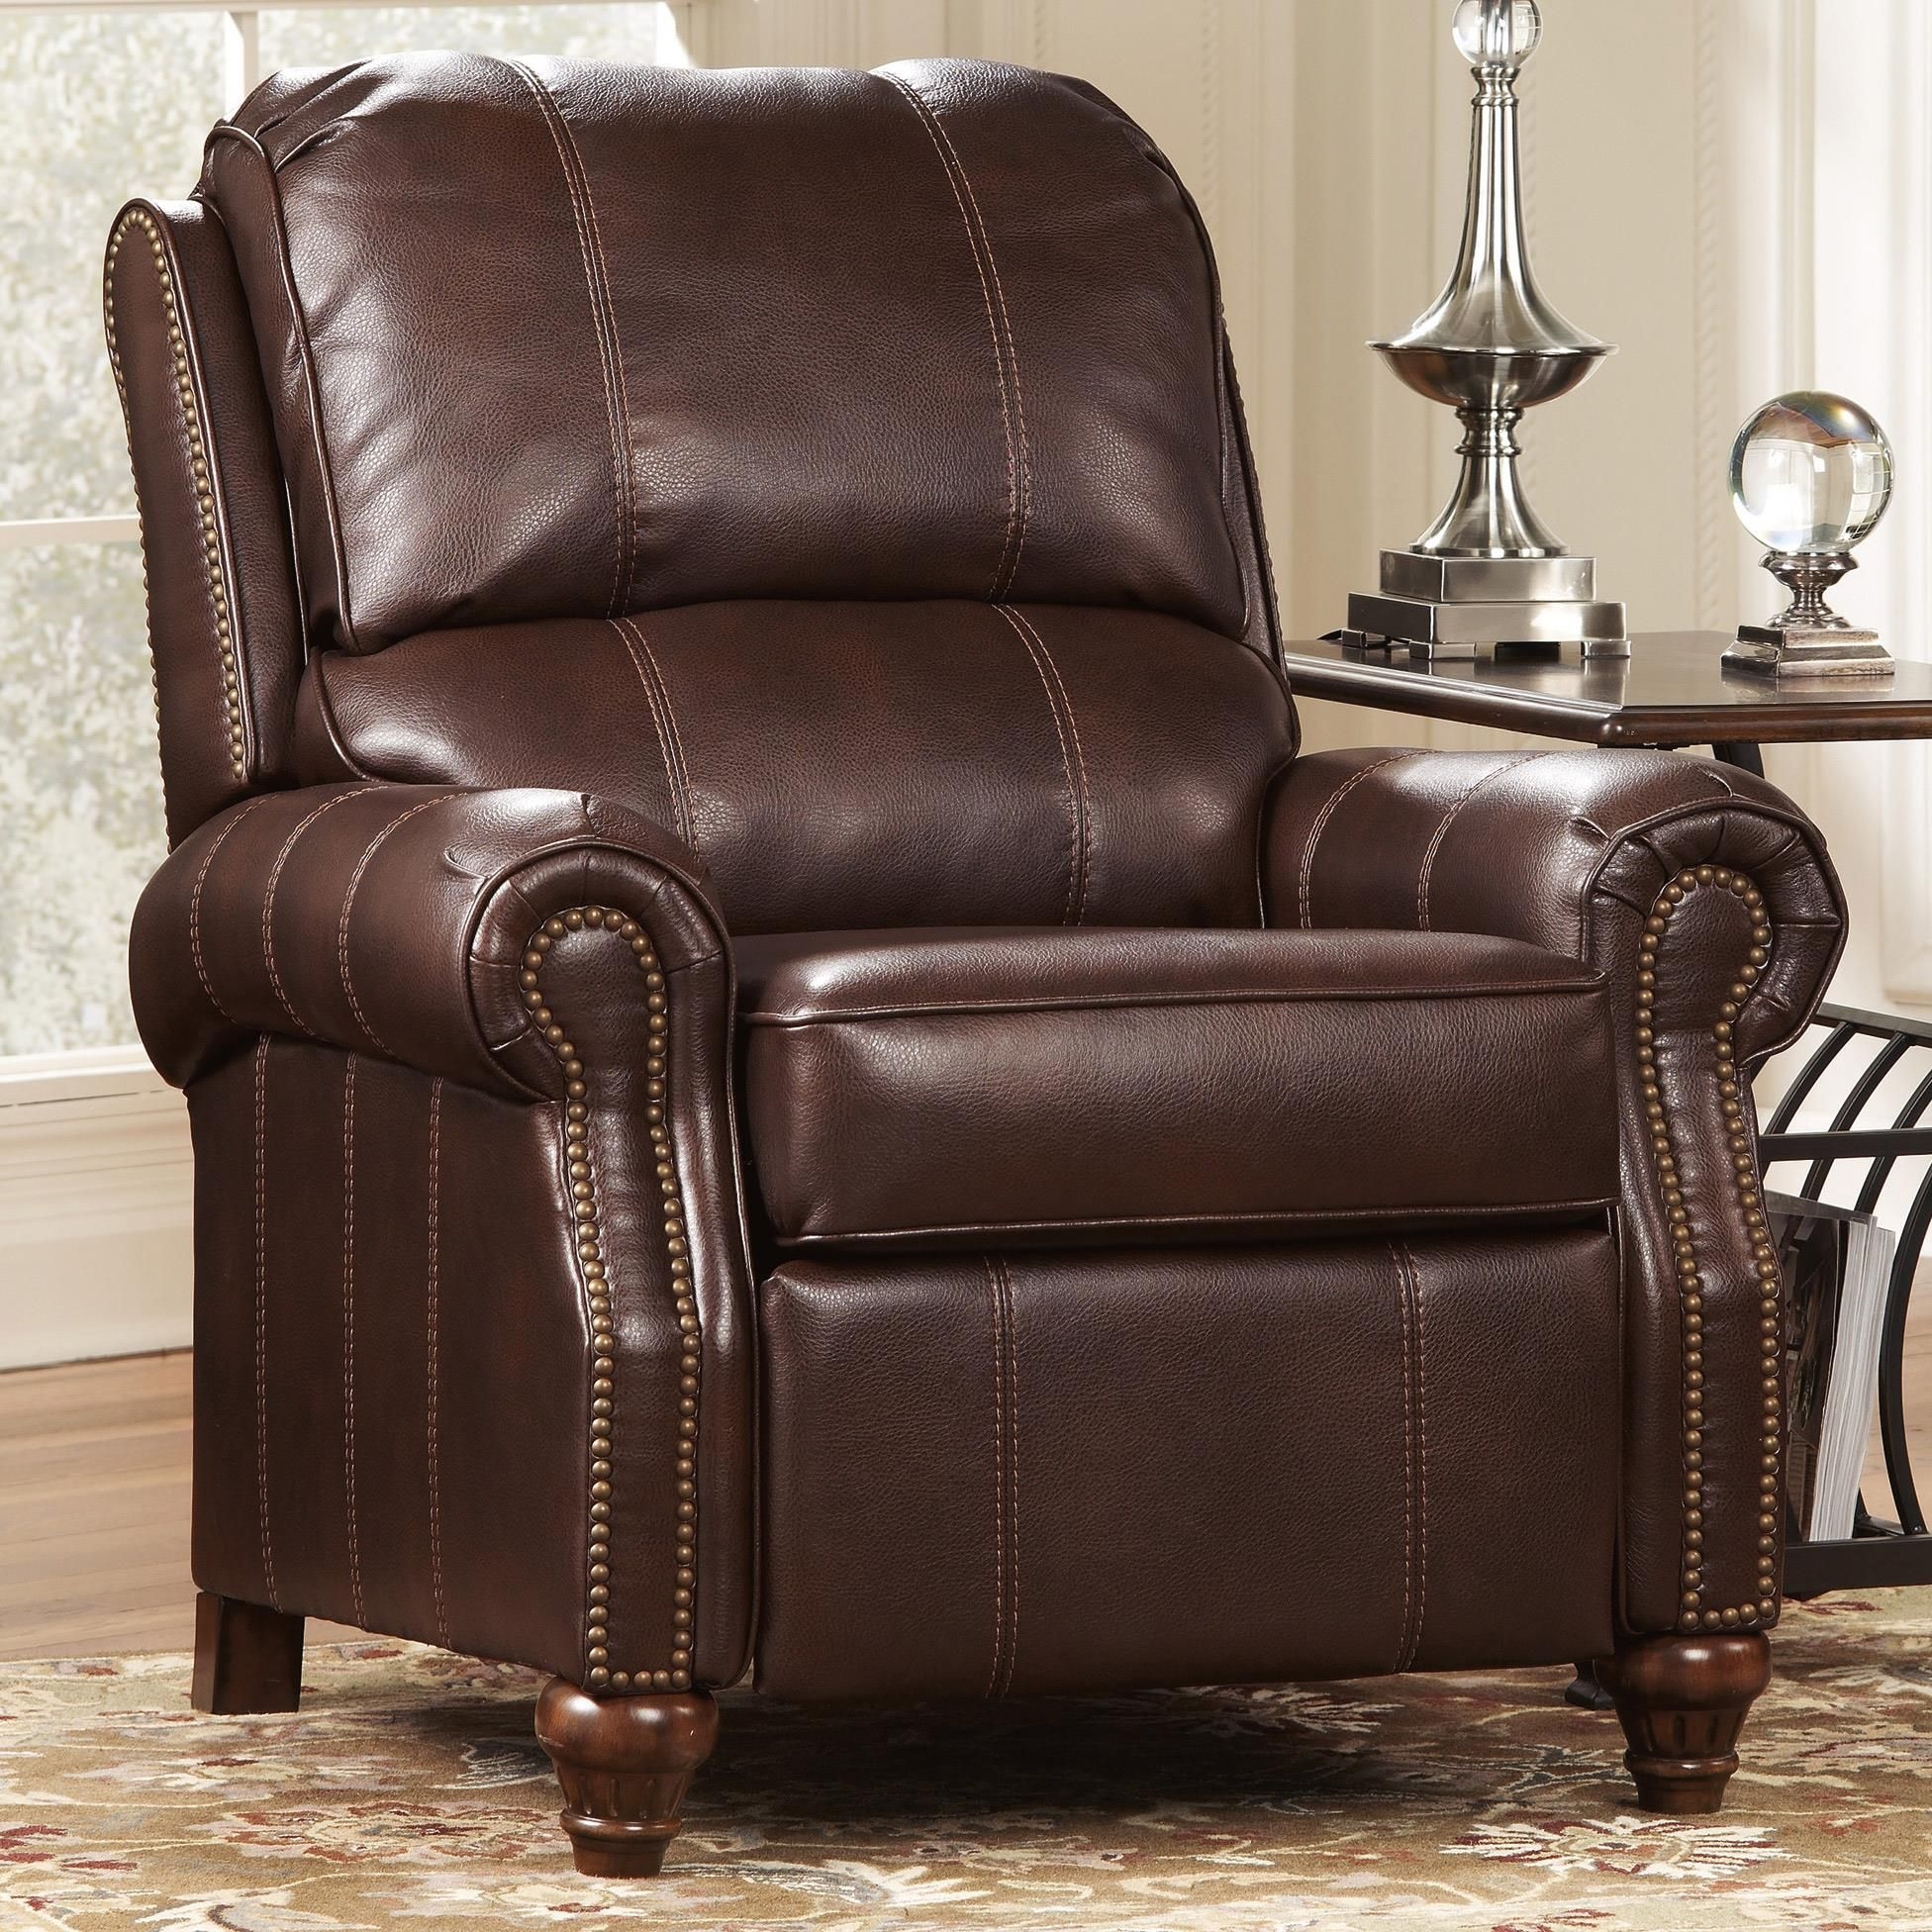 Leather recliner with nailhead trim 13